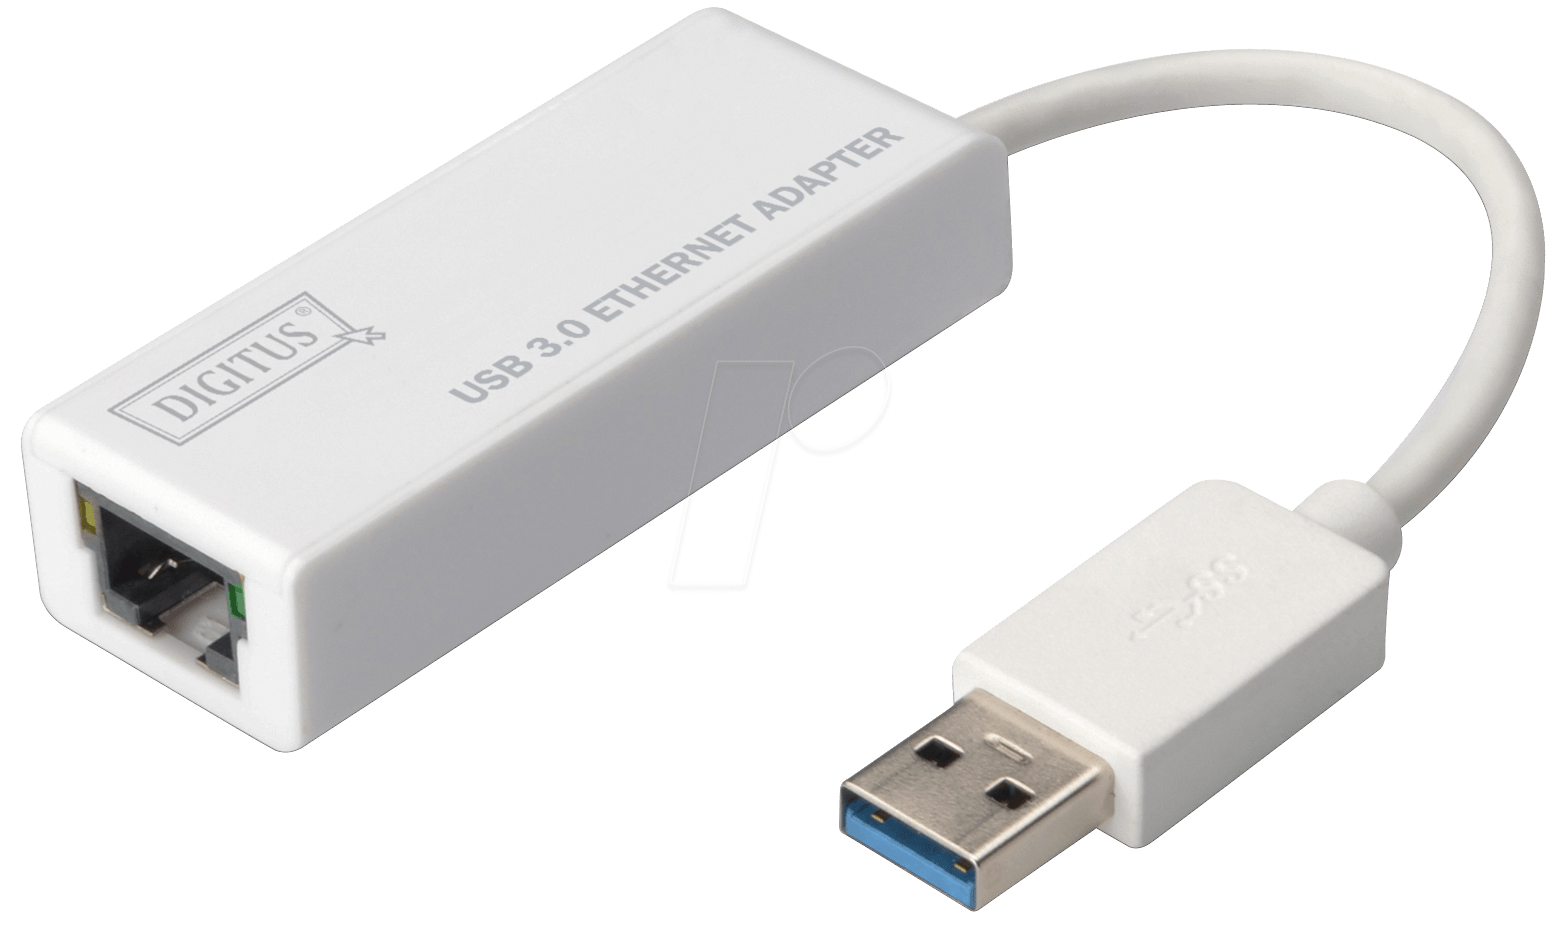 rd9700 usb ethernet adapter driver windows 7 download